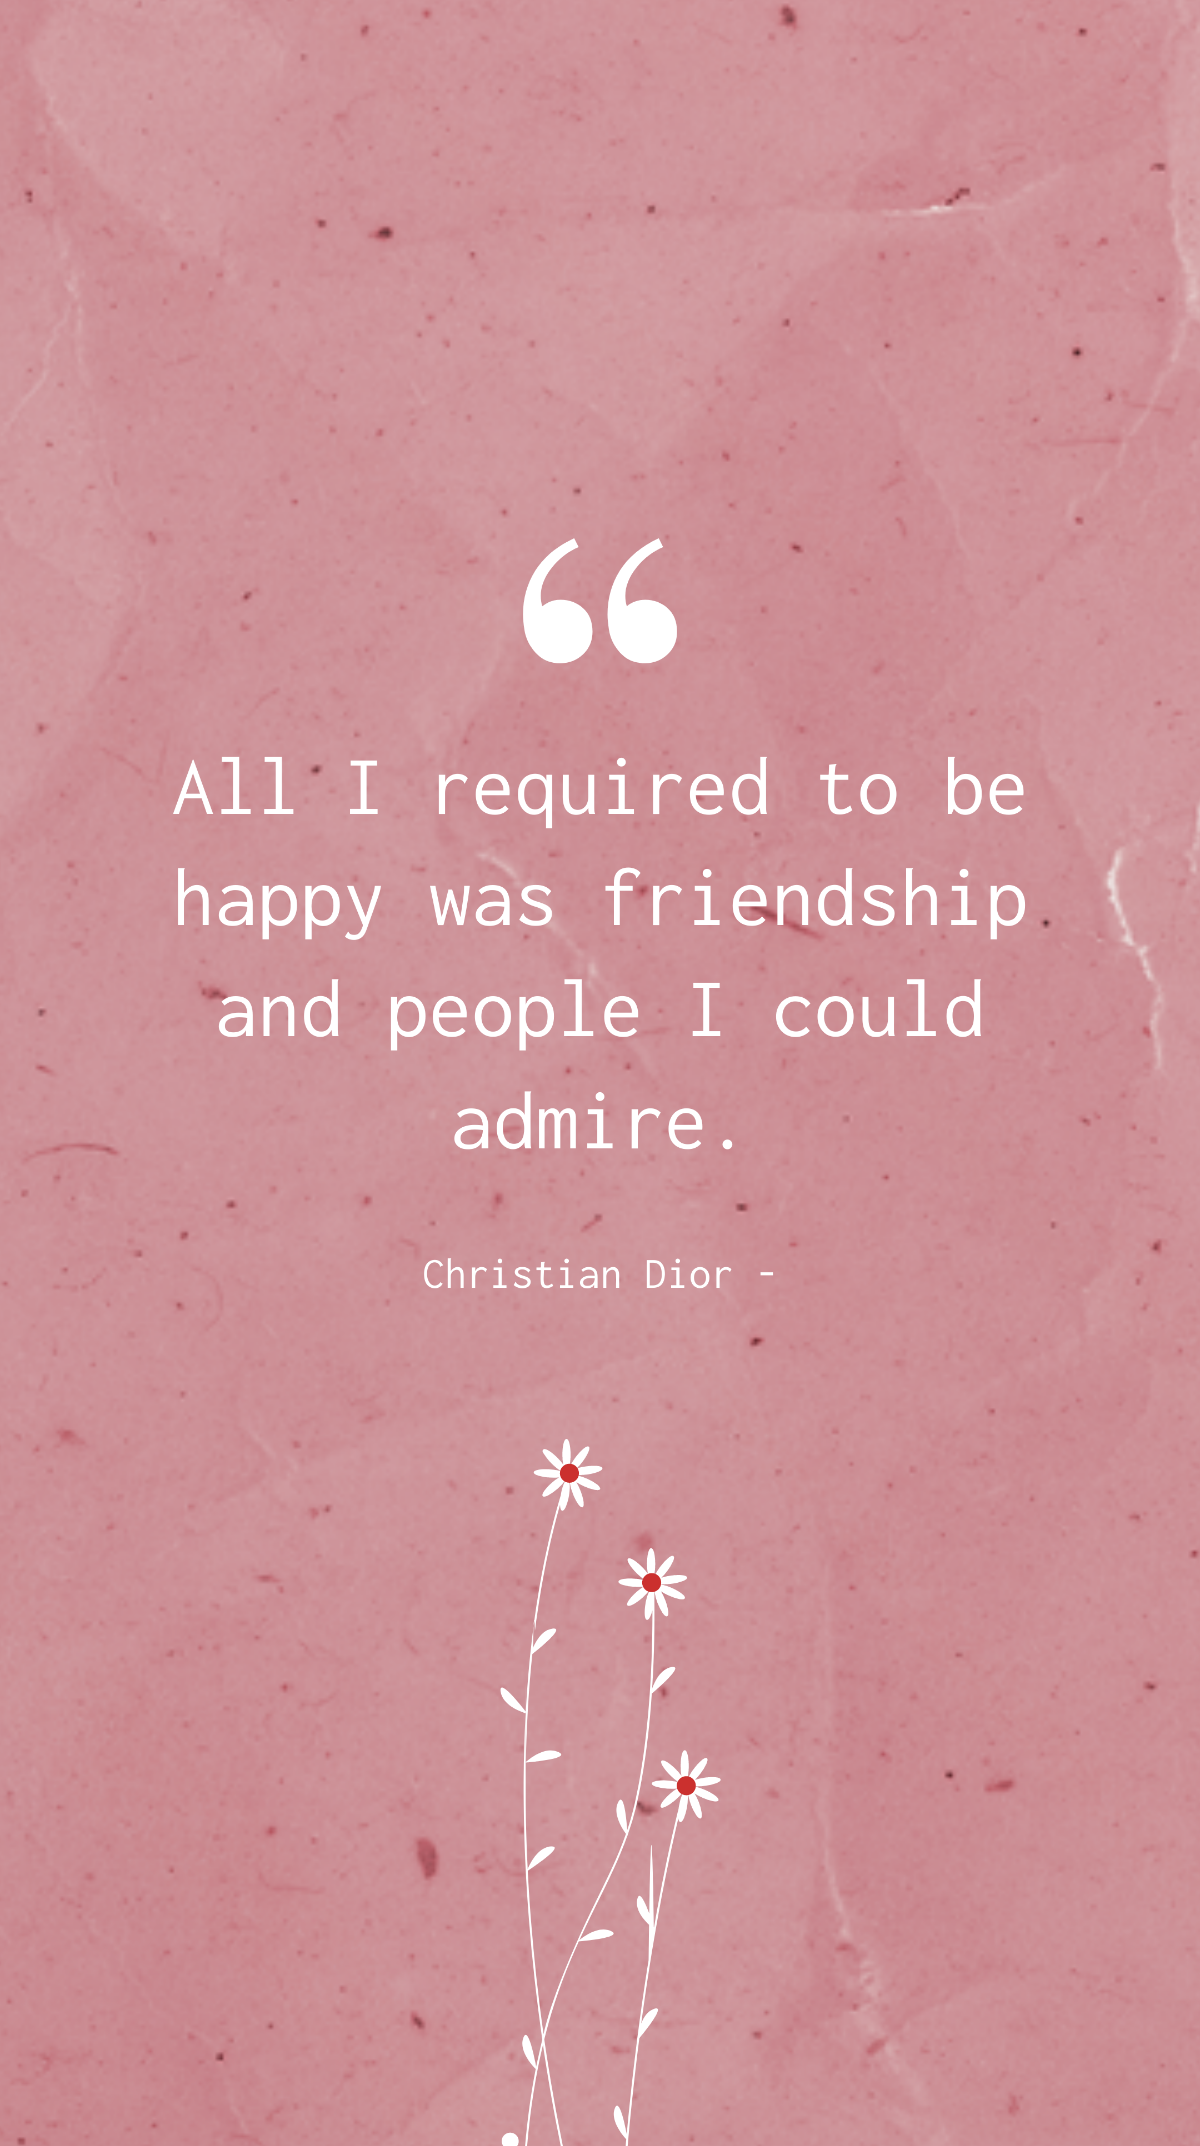 Christian Dior - All I required to be happy was friendship and people I could admire. Template